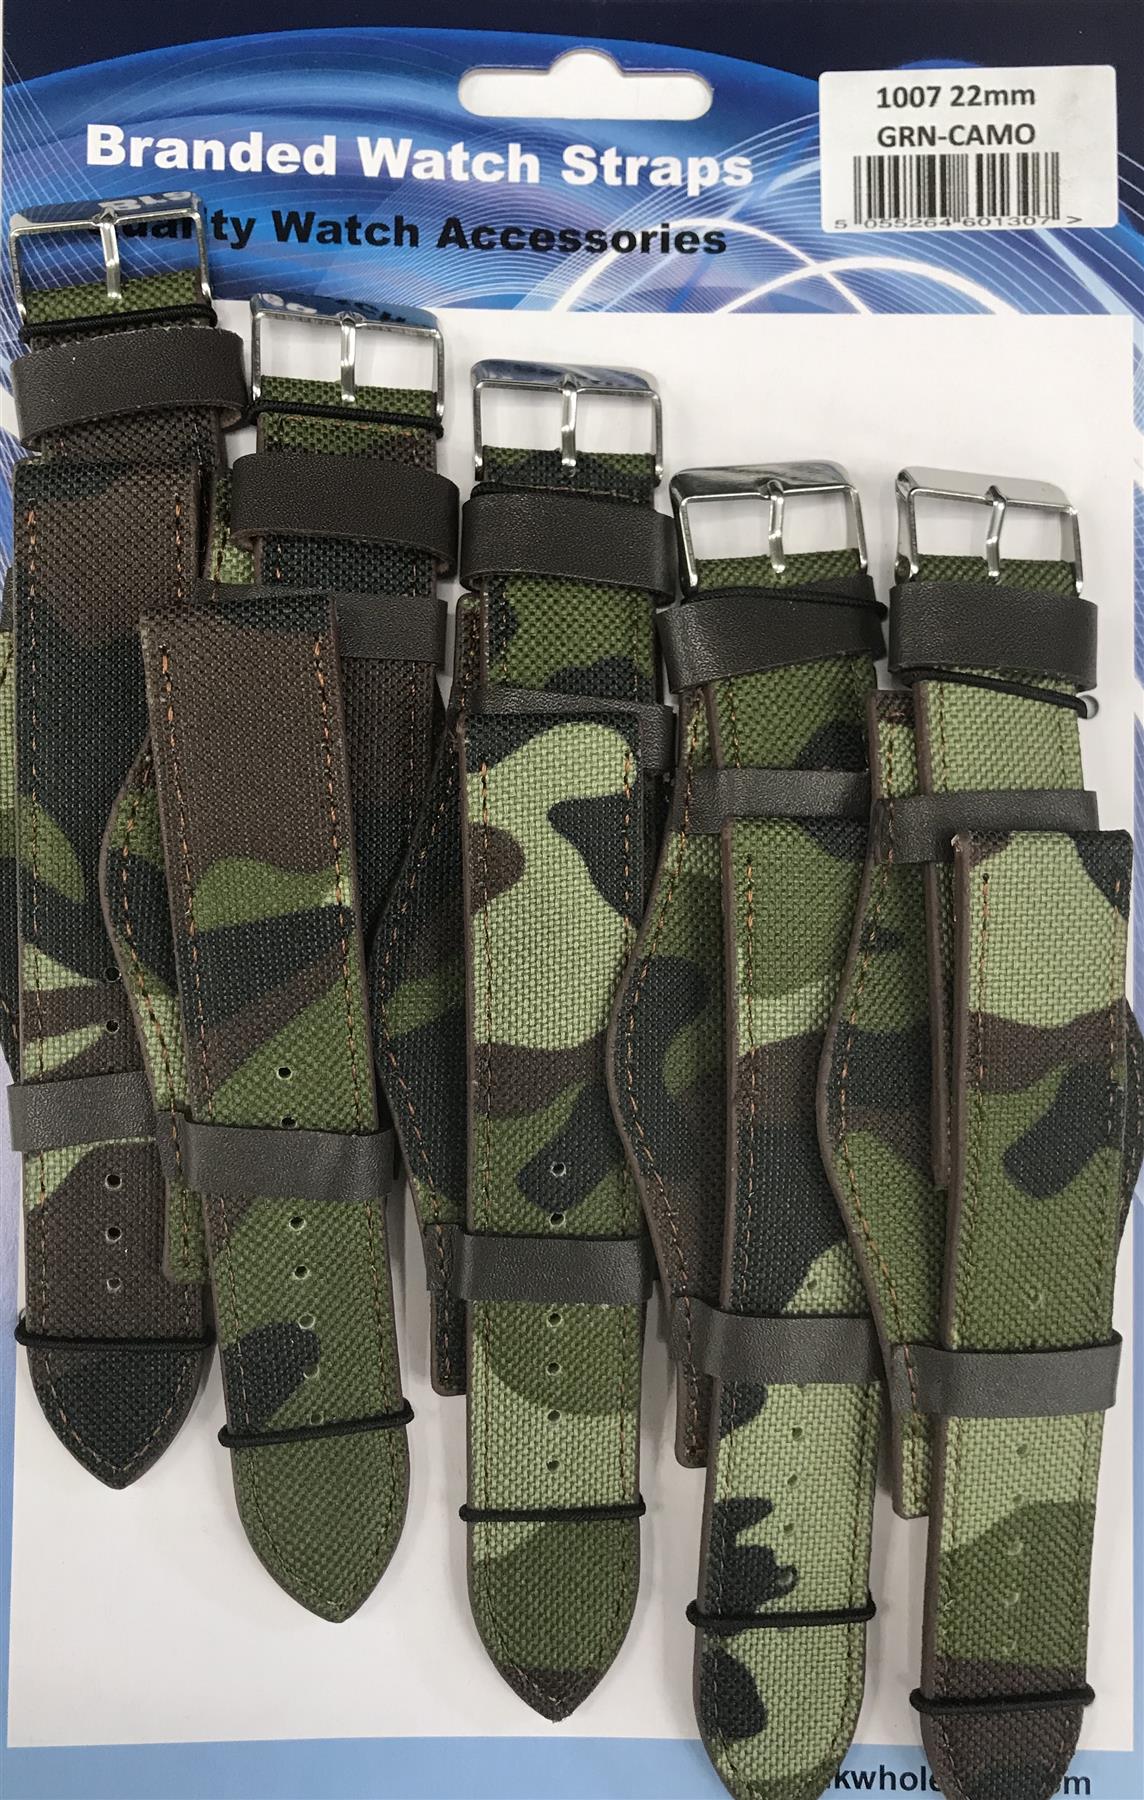 1007GRN Leather Camo Green Military Watch Straps Pk5 Available Sizes 18MM TO 22MM